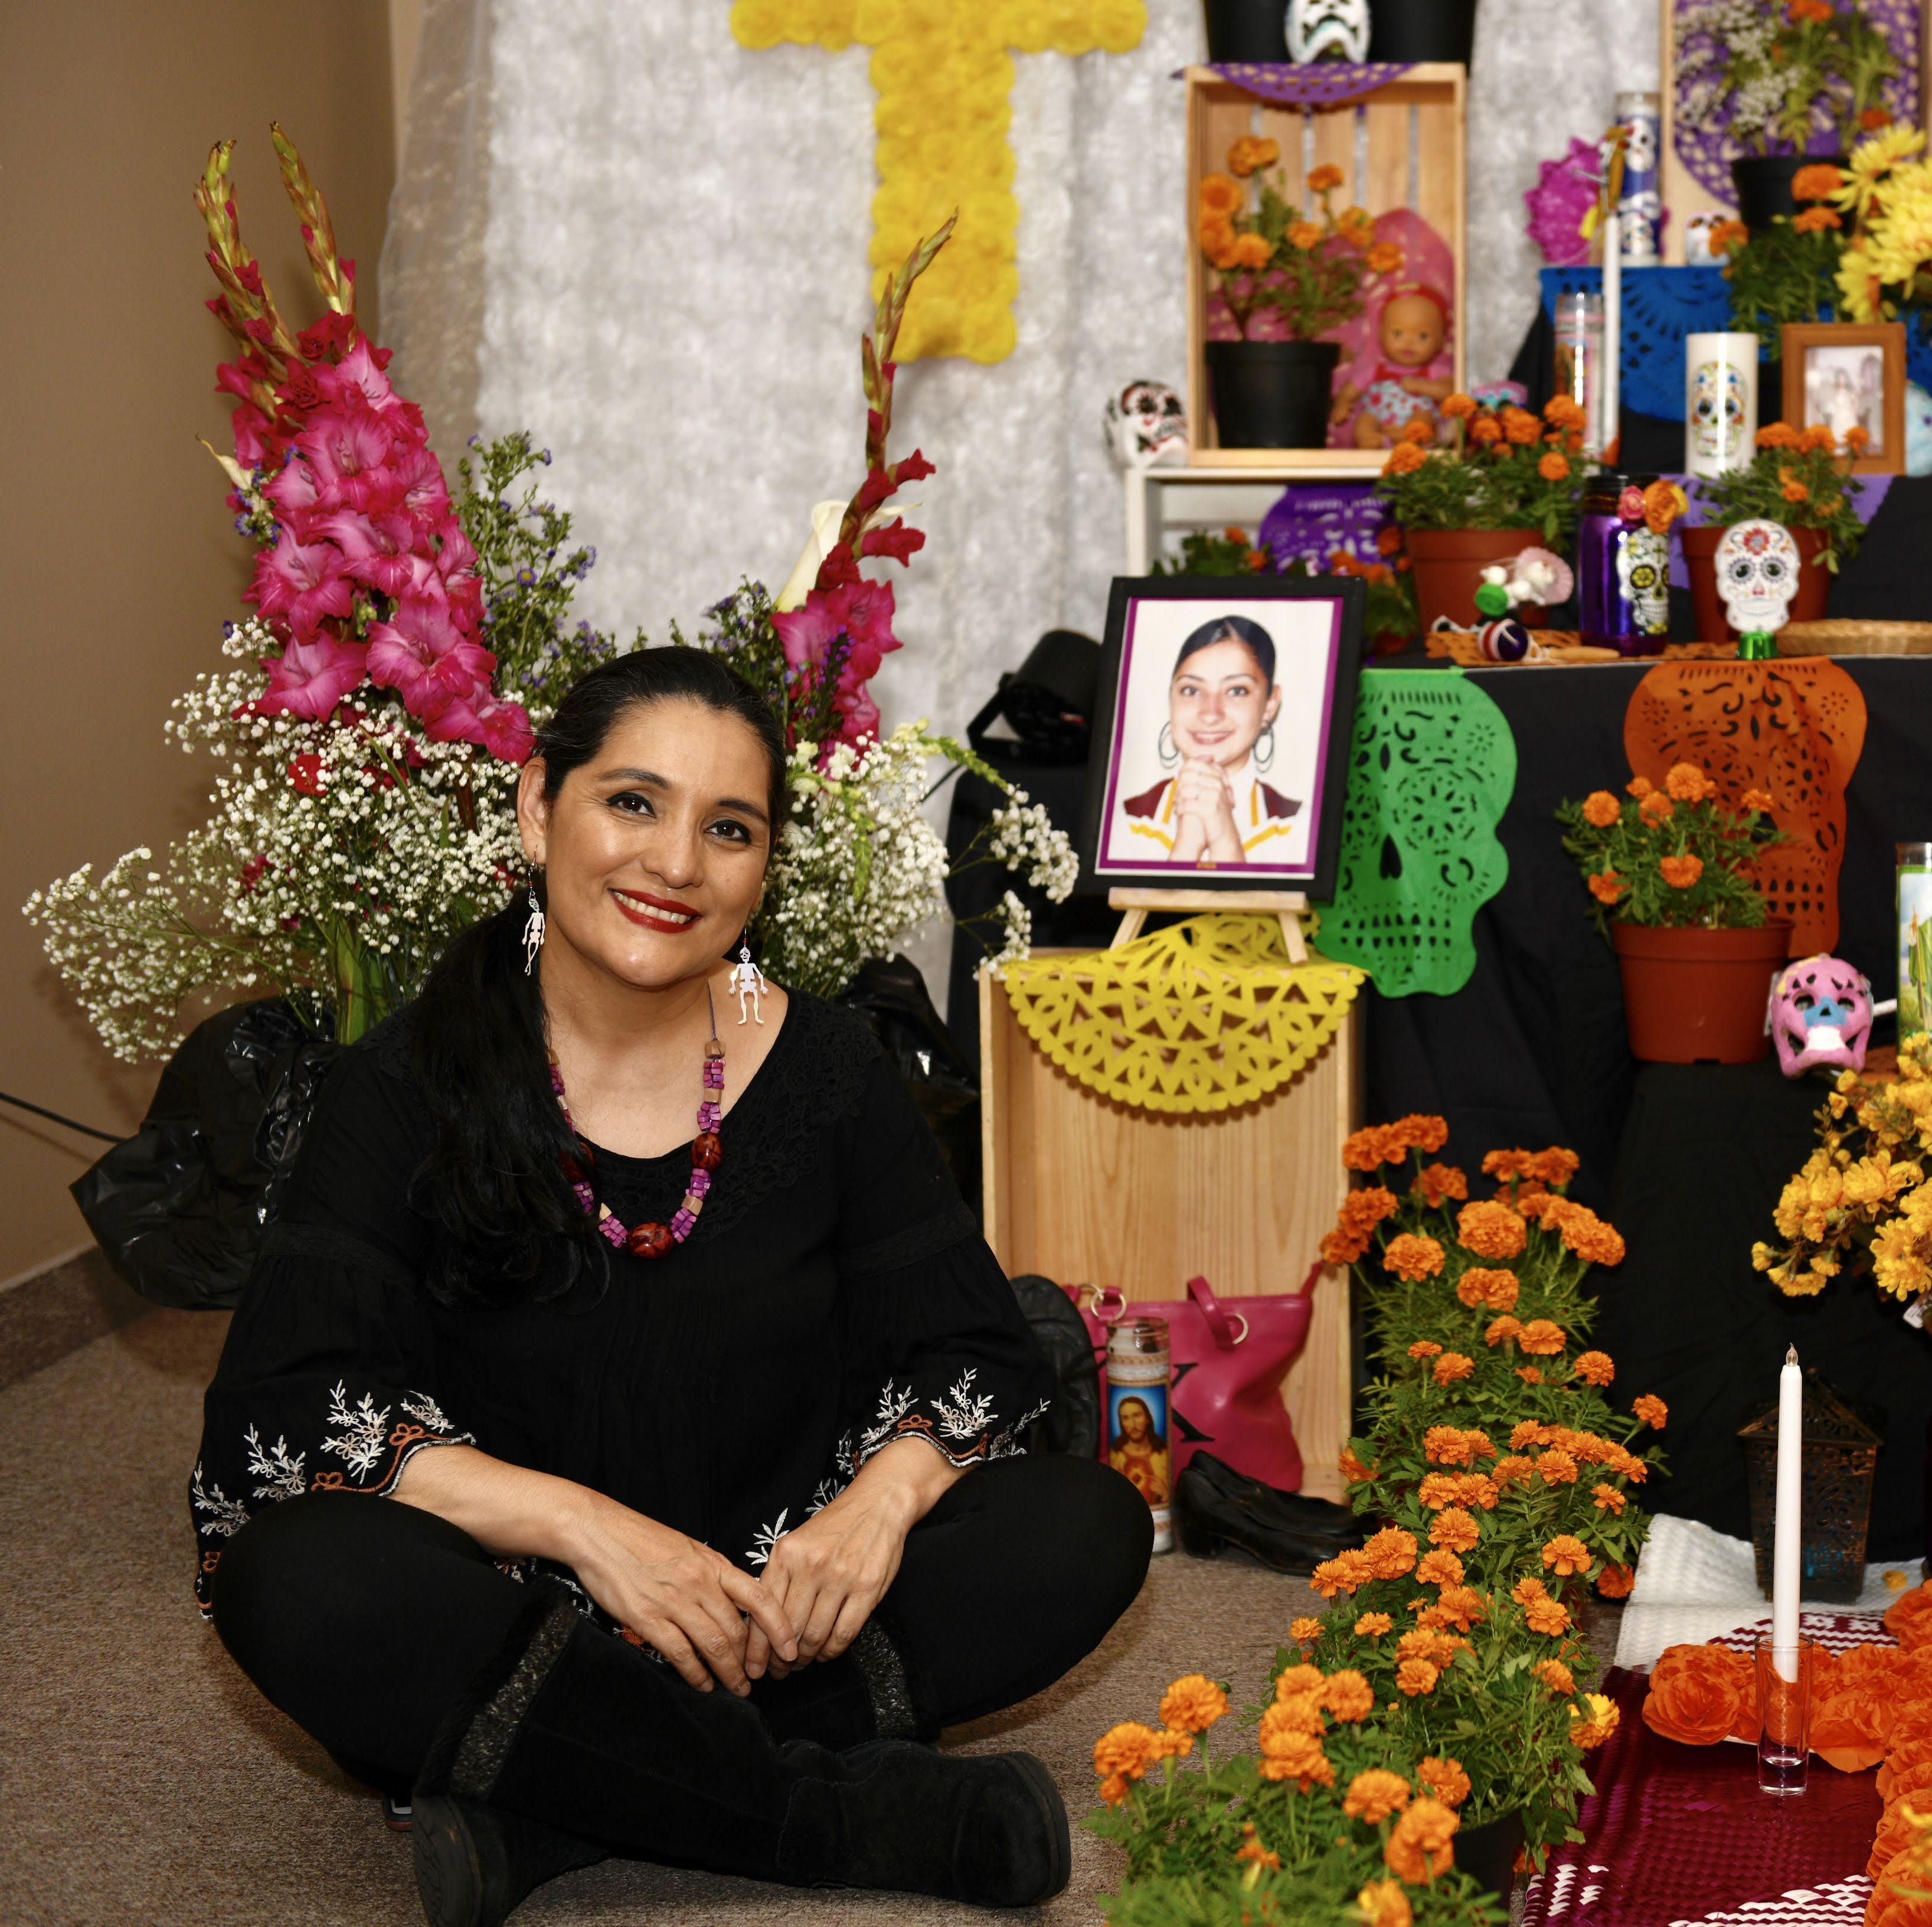 Veronica Robles sits in front of a Day of the Dead rememberance altar in all black. The altar is multitiered and very colorful with various floral arrangements, photos of loved ones, candles and colorfully painted skull icons.